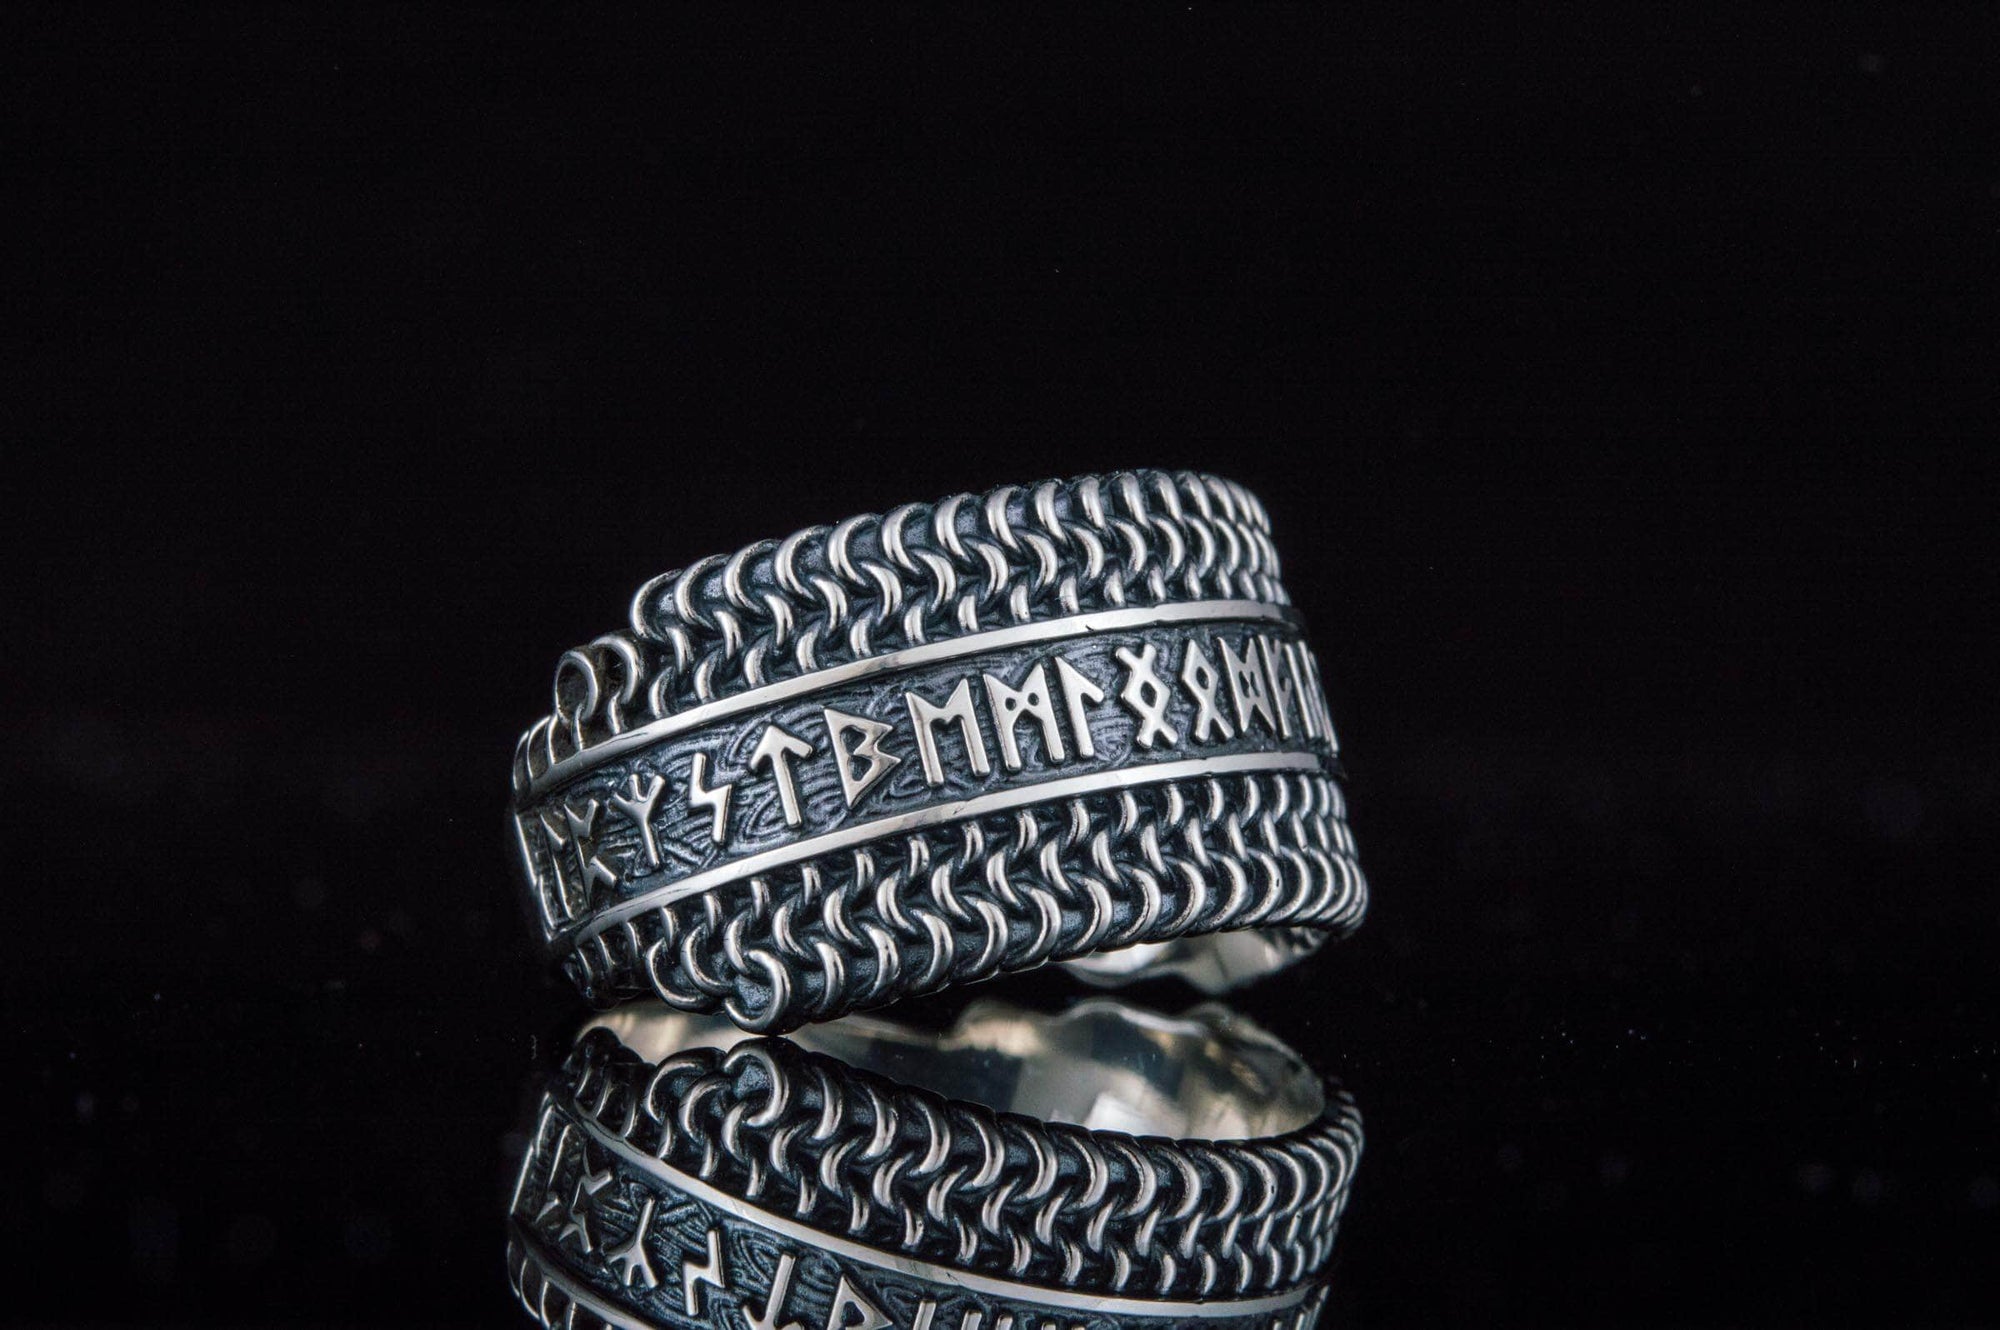 Hauberk Viking Ring with Elder Futhark Runes Sterling Silver Unique Jewelry Ancient Treasures Ancientreasures Viking Odin Thor Mjolnir Celtic Ancient Egypt Norse Norse Mythology